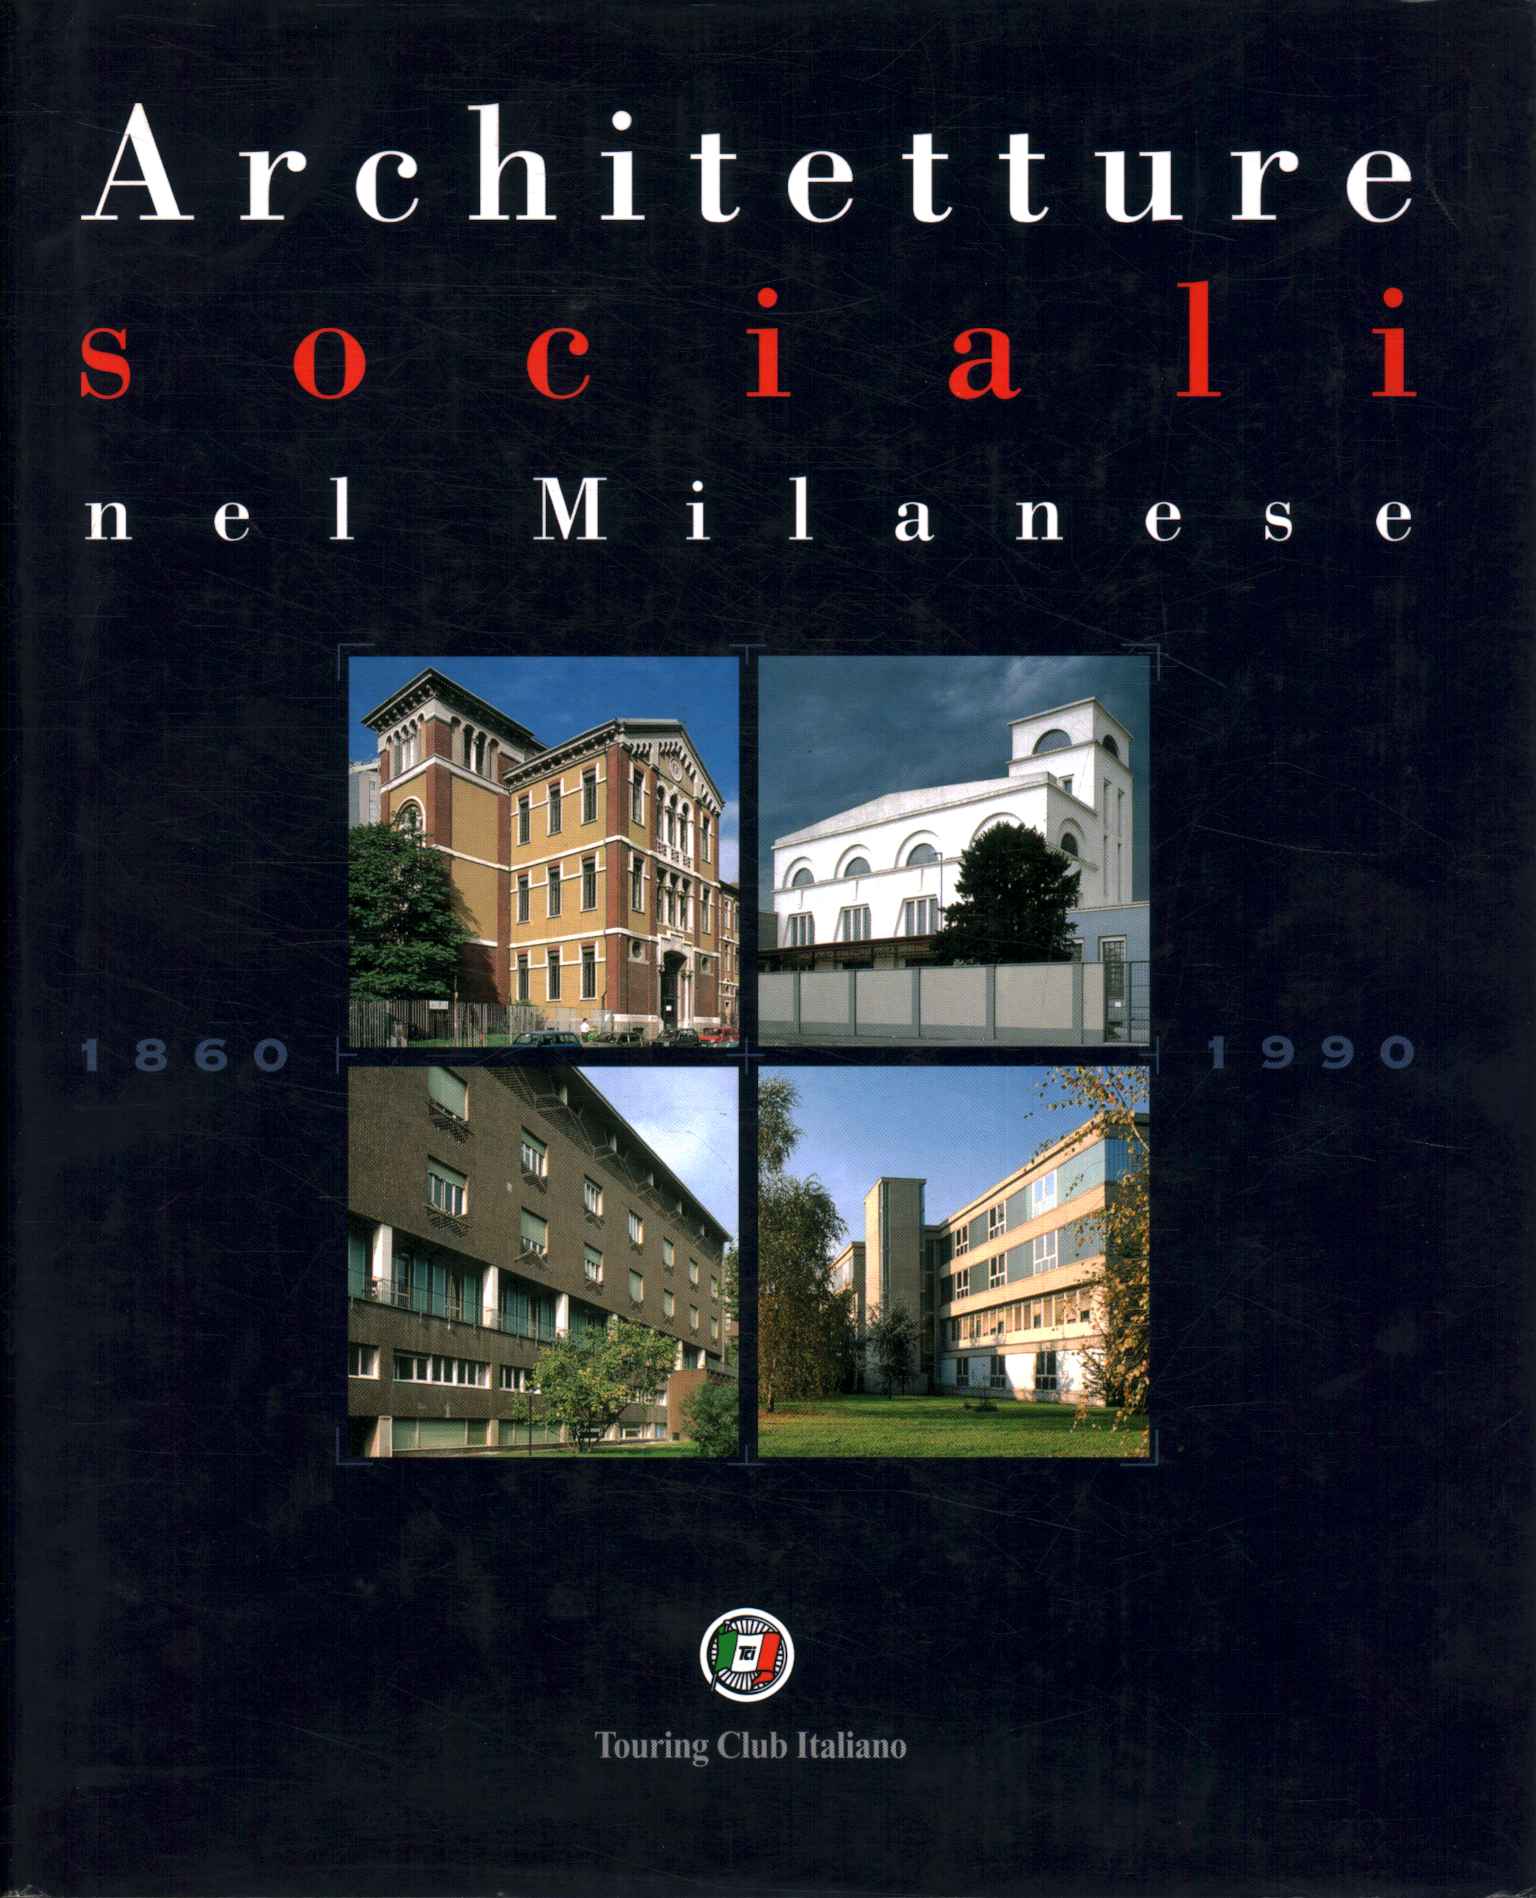 Social architecture in the Milan area